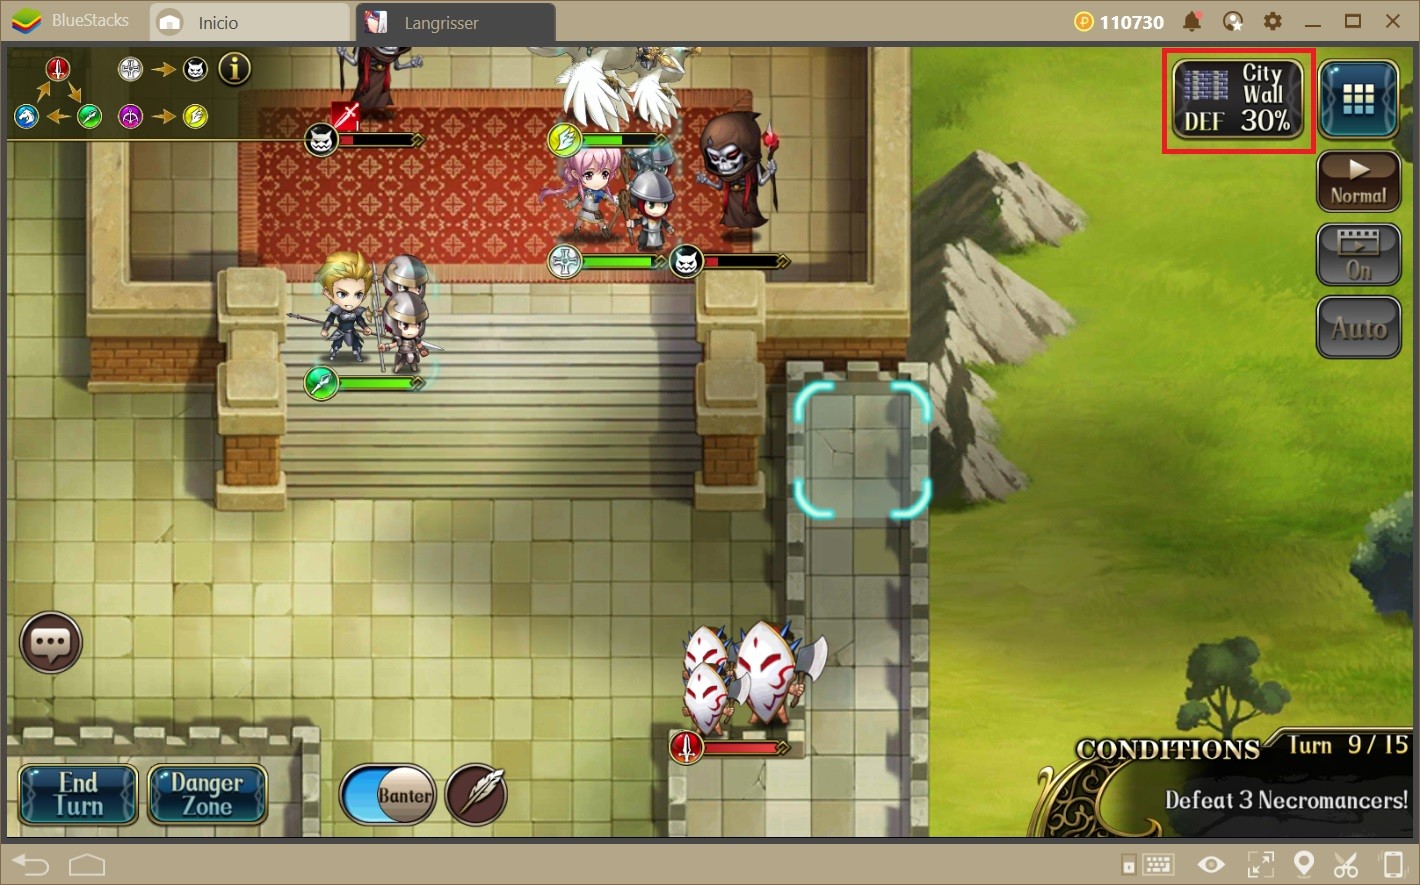 Combat Fundamentals of Langrisser: Learn all about the Priority and Terrain systems